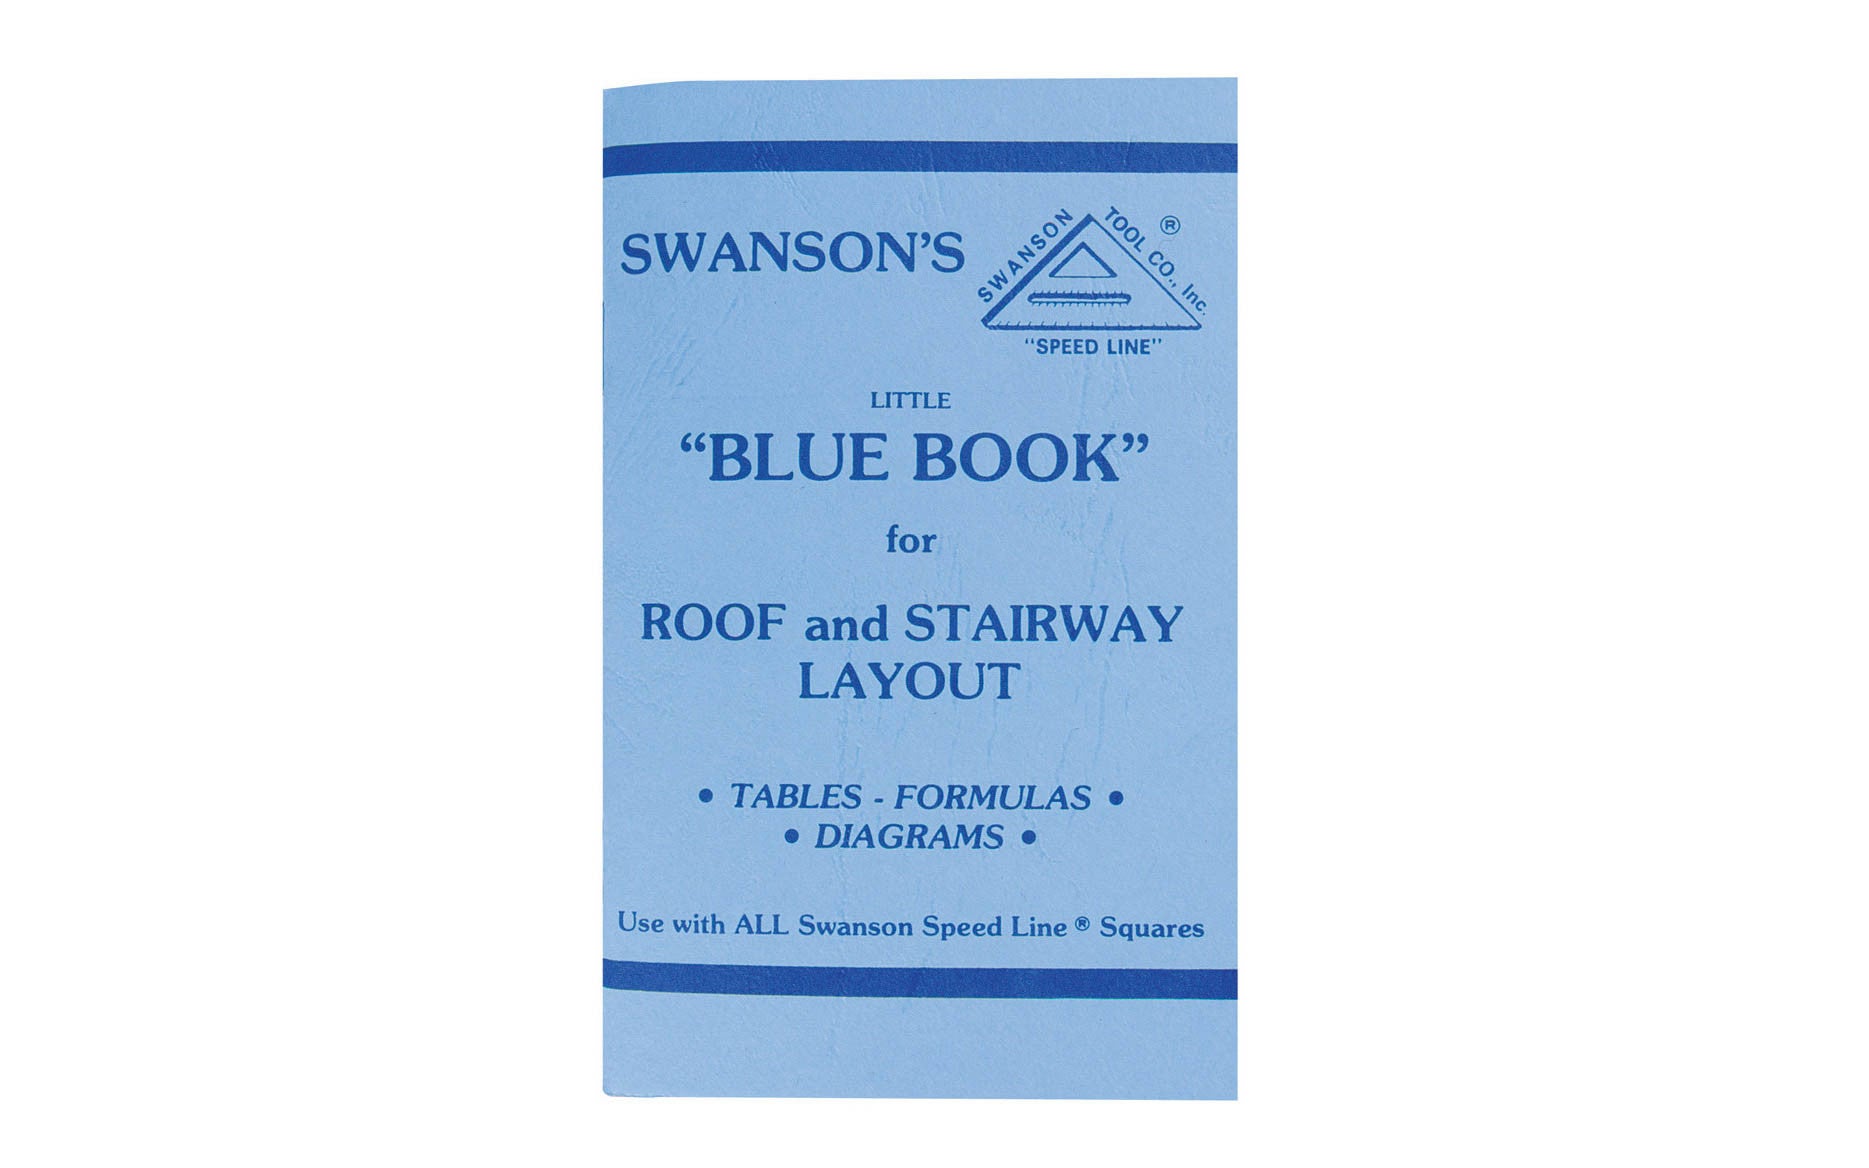 Swanson's "Little Blue Book of Instructions for Roof & Stairway Layout"